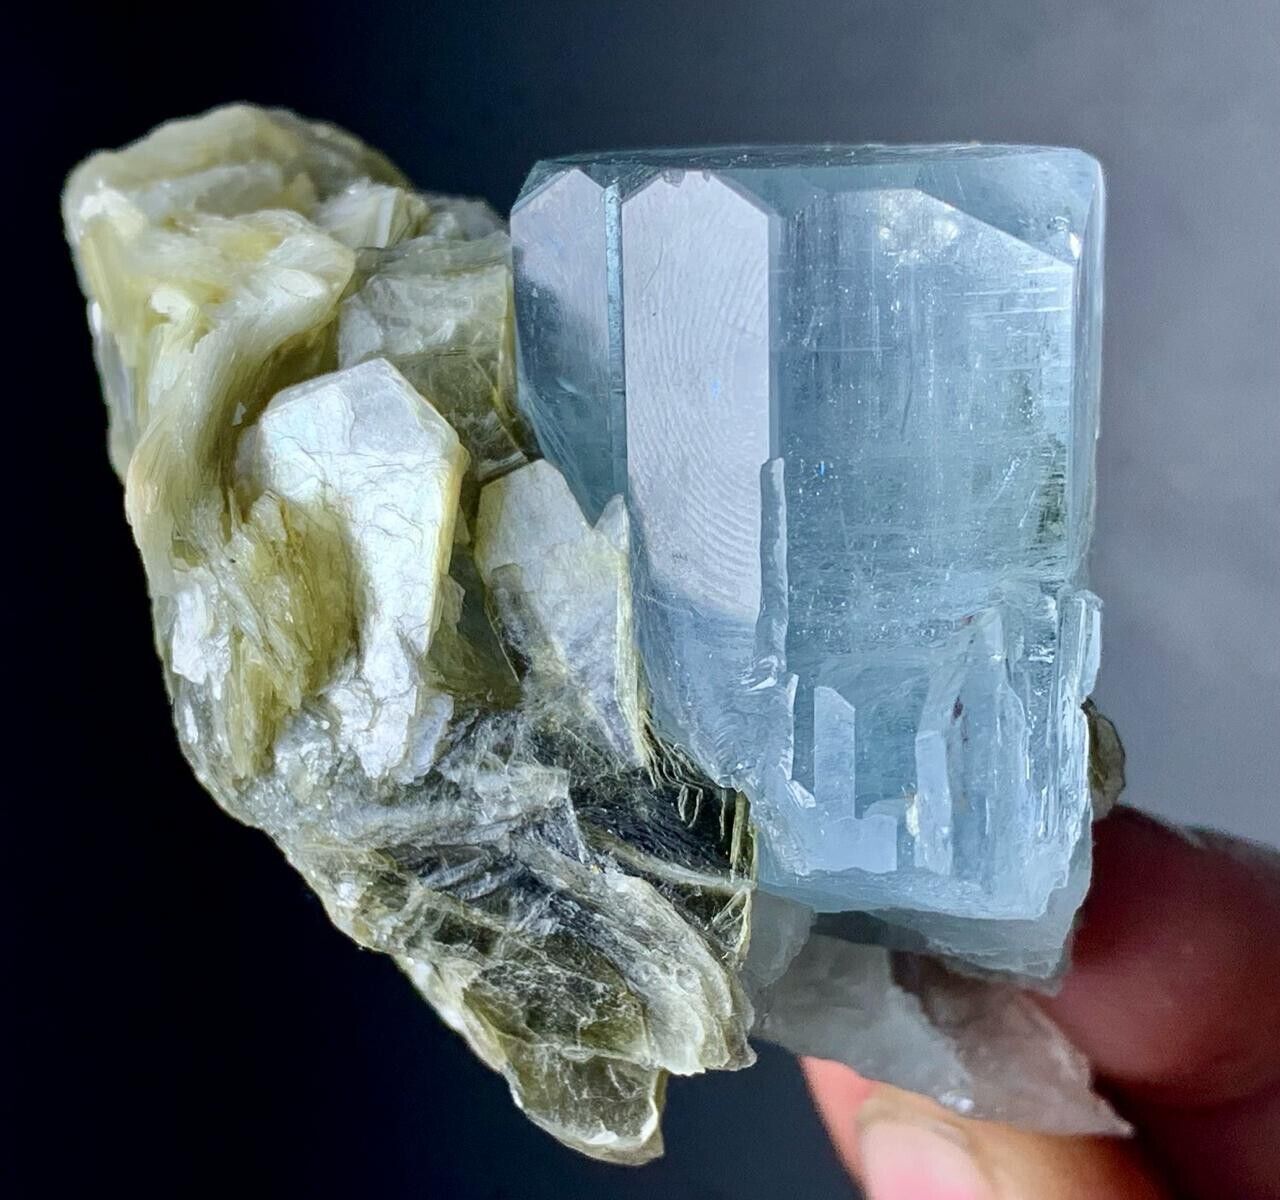 475 Cts Terminated Aquamarine With Mica Crystal from Skardu Pakistan